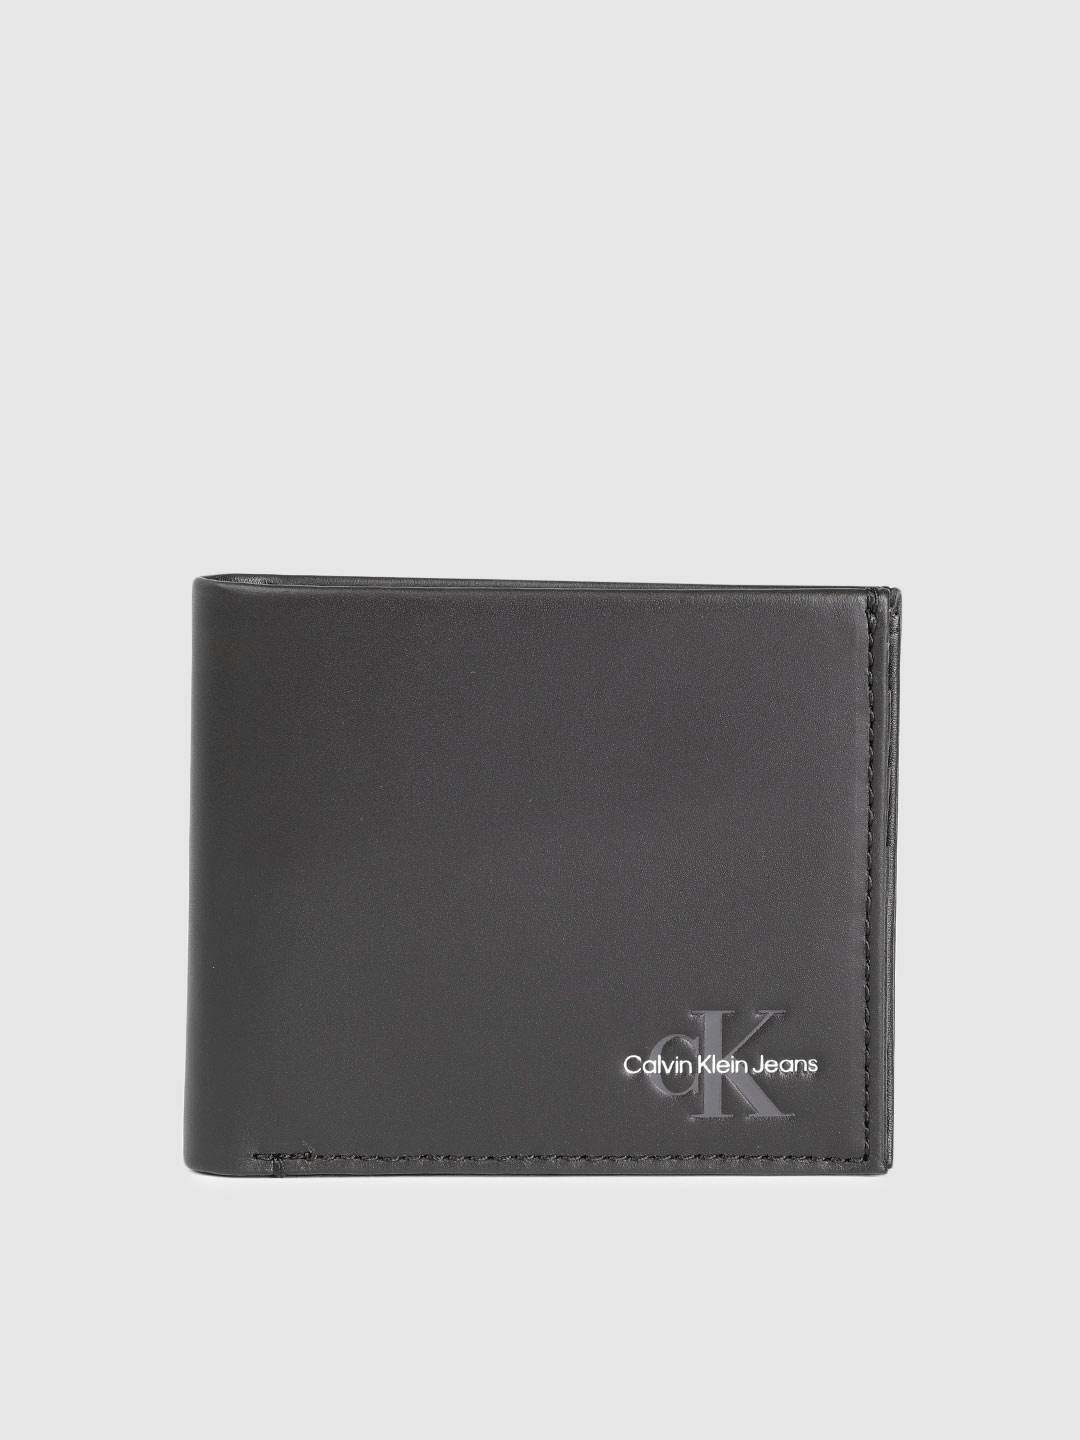 Ted Baker Men Leather Two Fold Wallet (Onesize) by Myntra